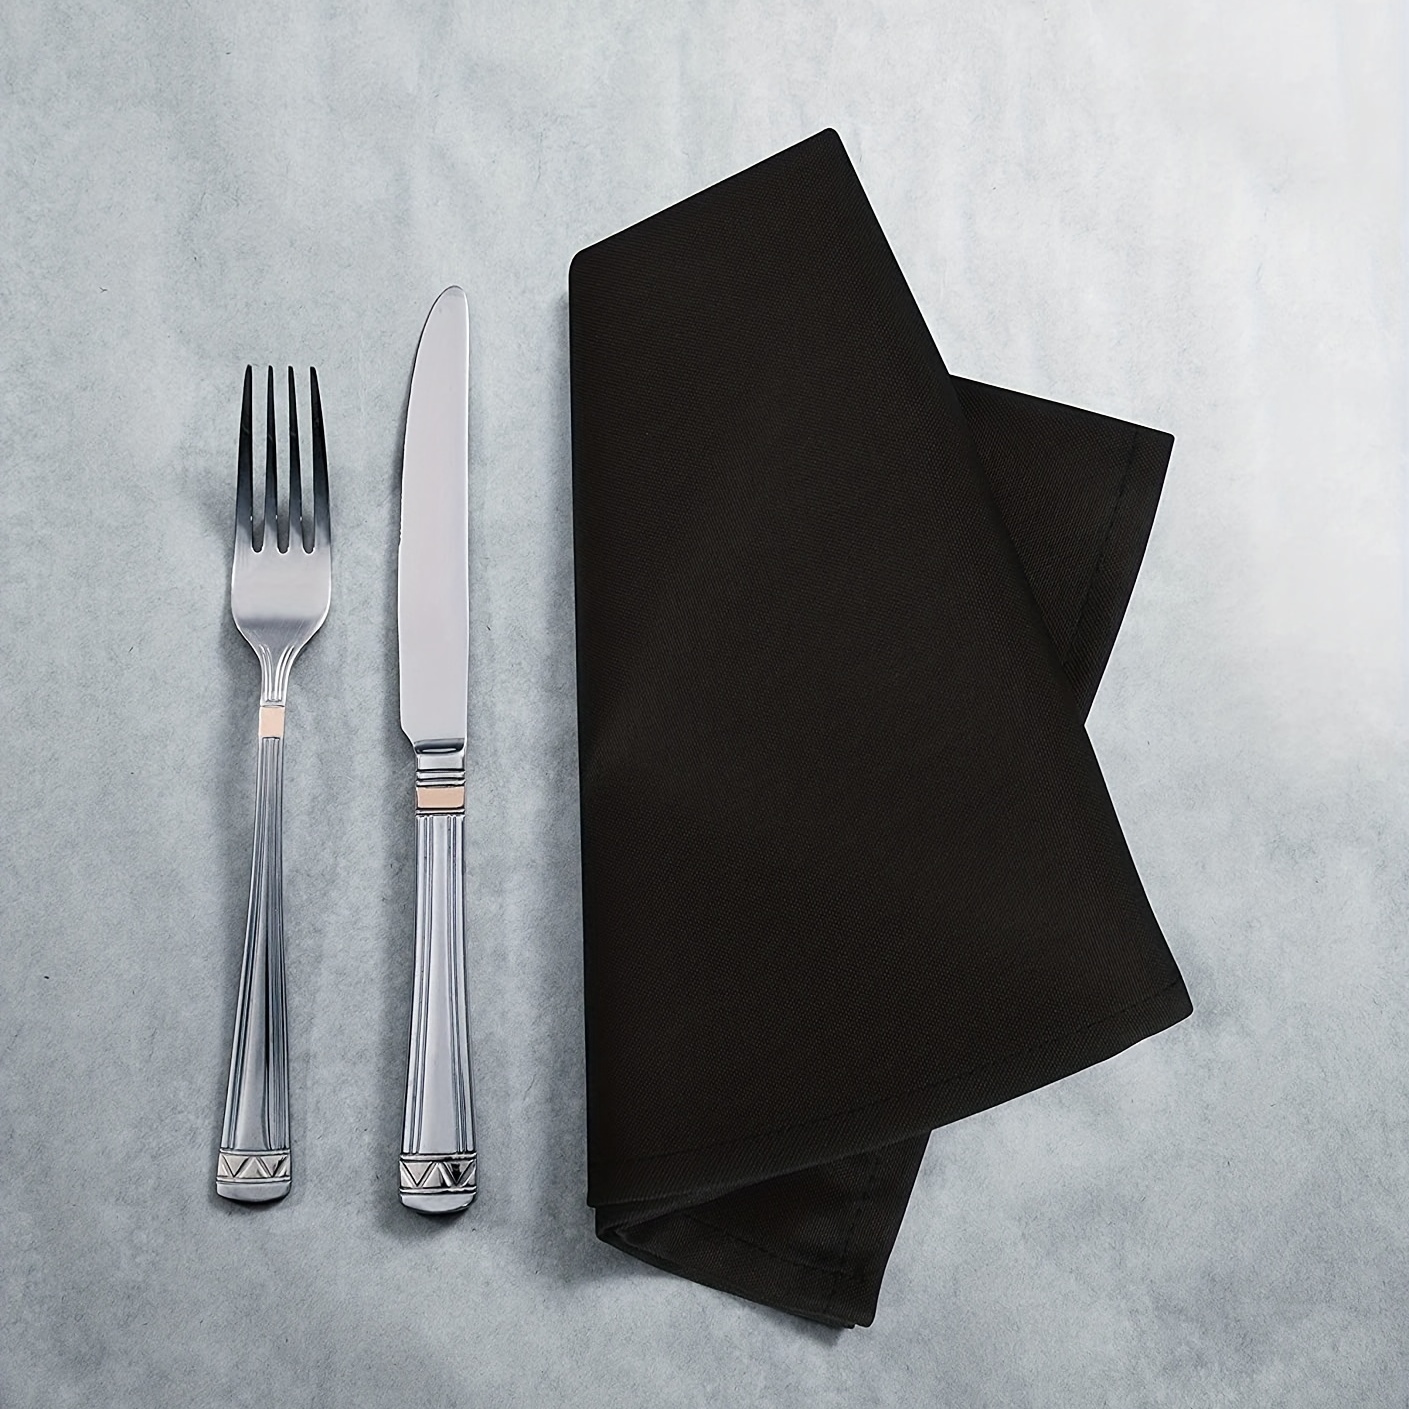 SXDY Dinner Cloth Napkins Washable Polyester Dinner Napkins for Family  Holiday Dinners Weddings Parties P3E3 